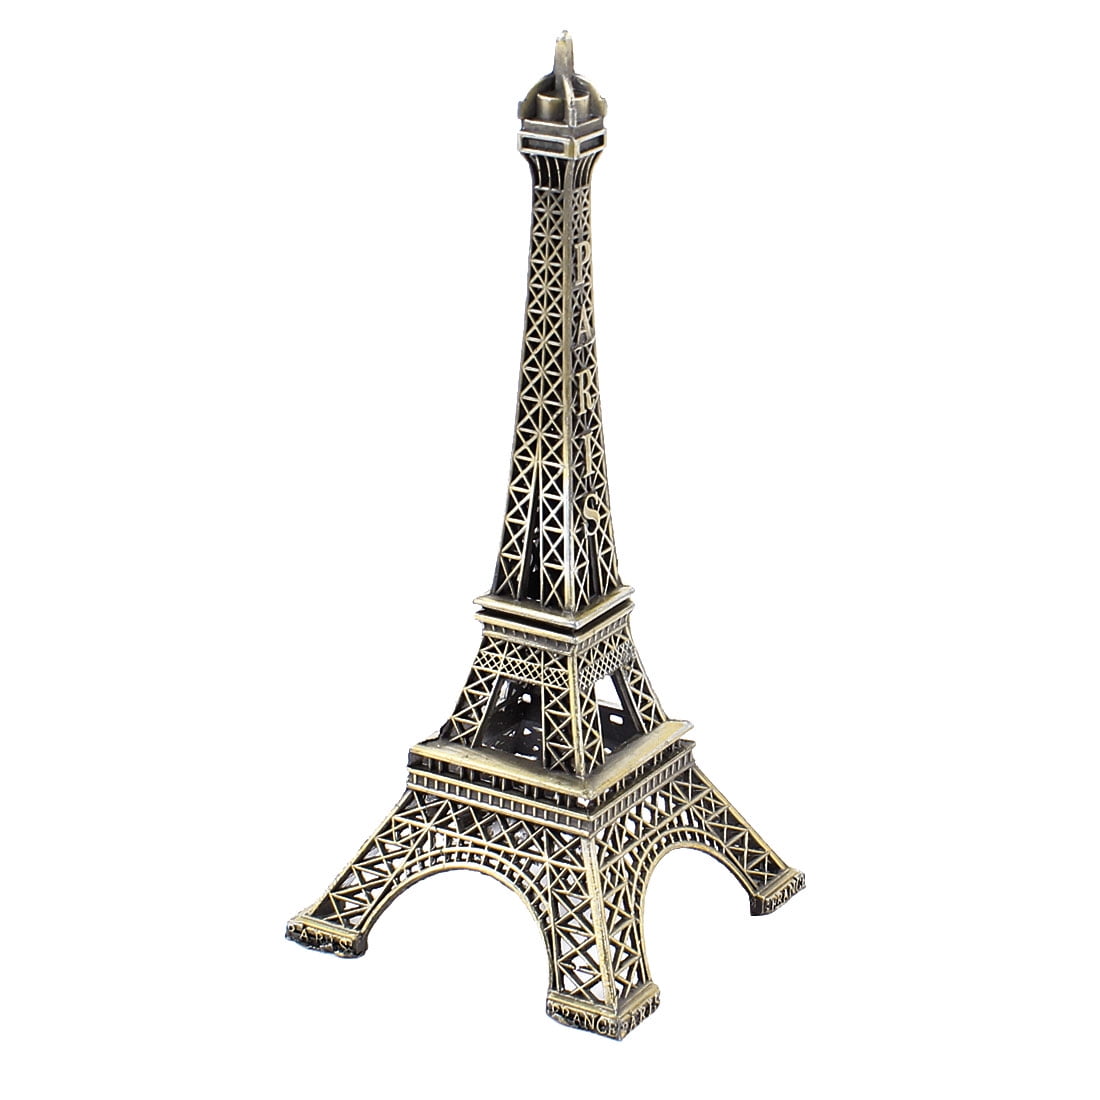 BROWN Eiffel Tower Paris France Metal Stand Model For Table Decor CHOOSE SIZE 